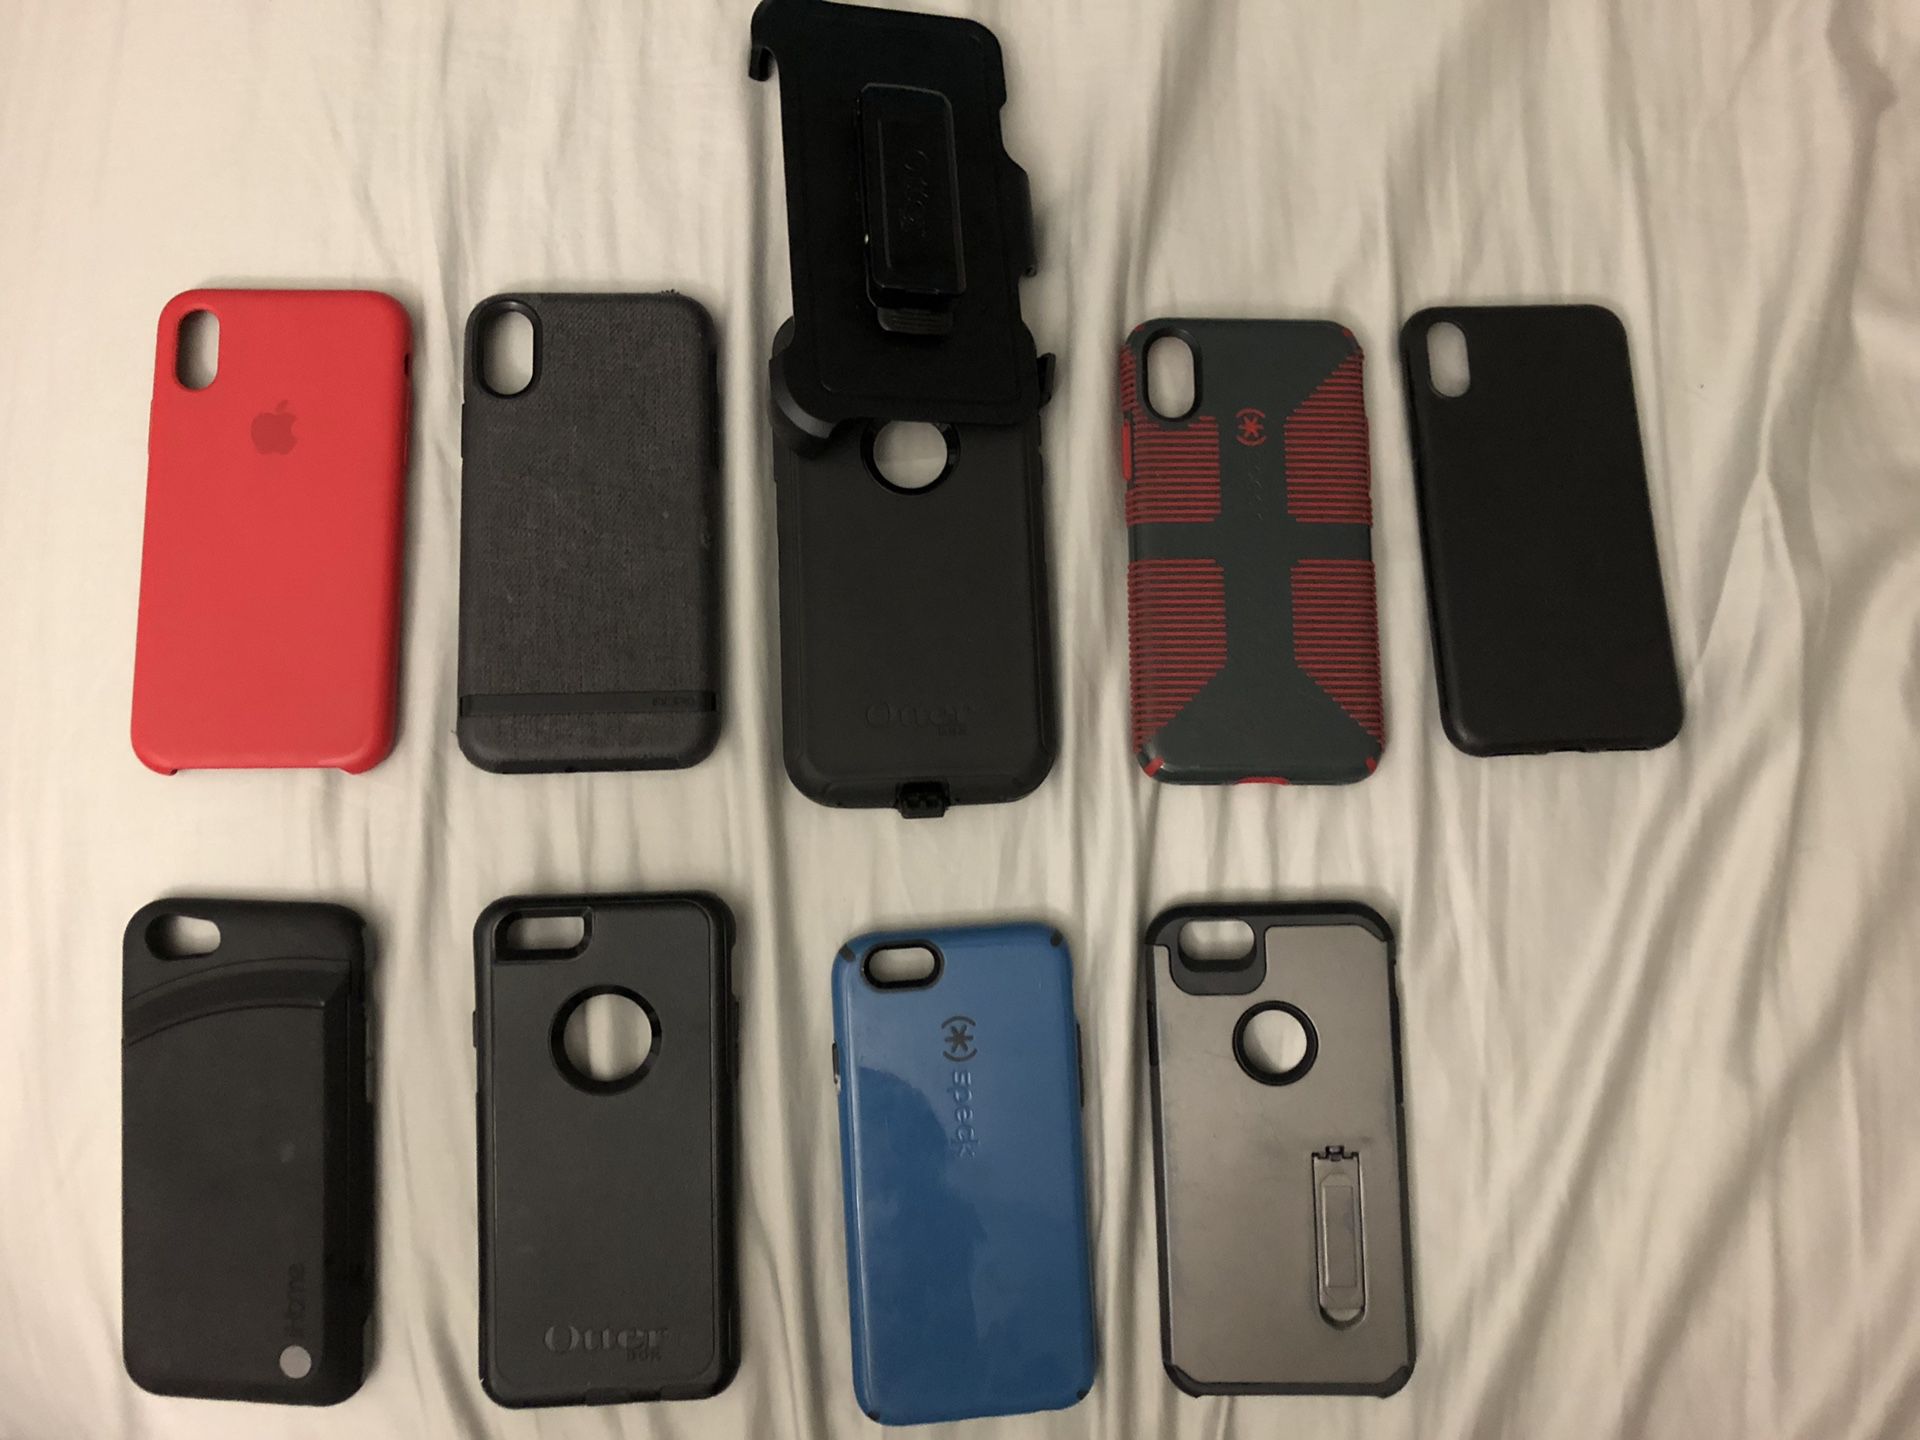 iPhone 6,6s cases and iPhone X ..